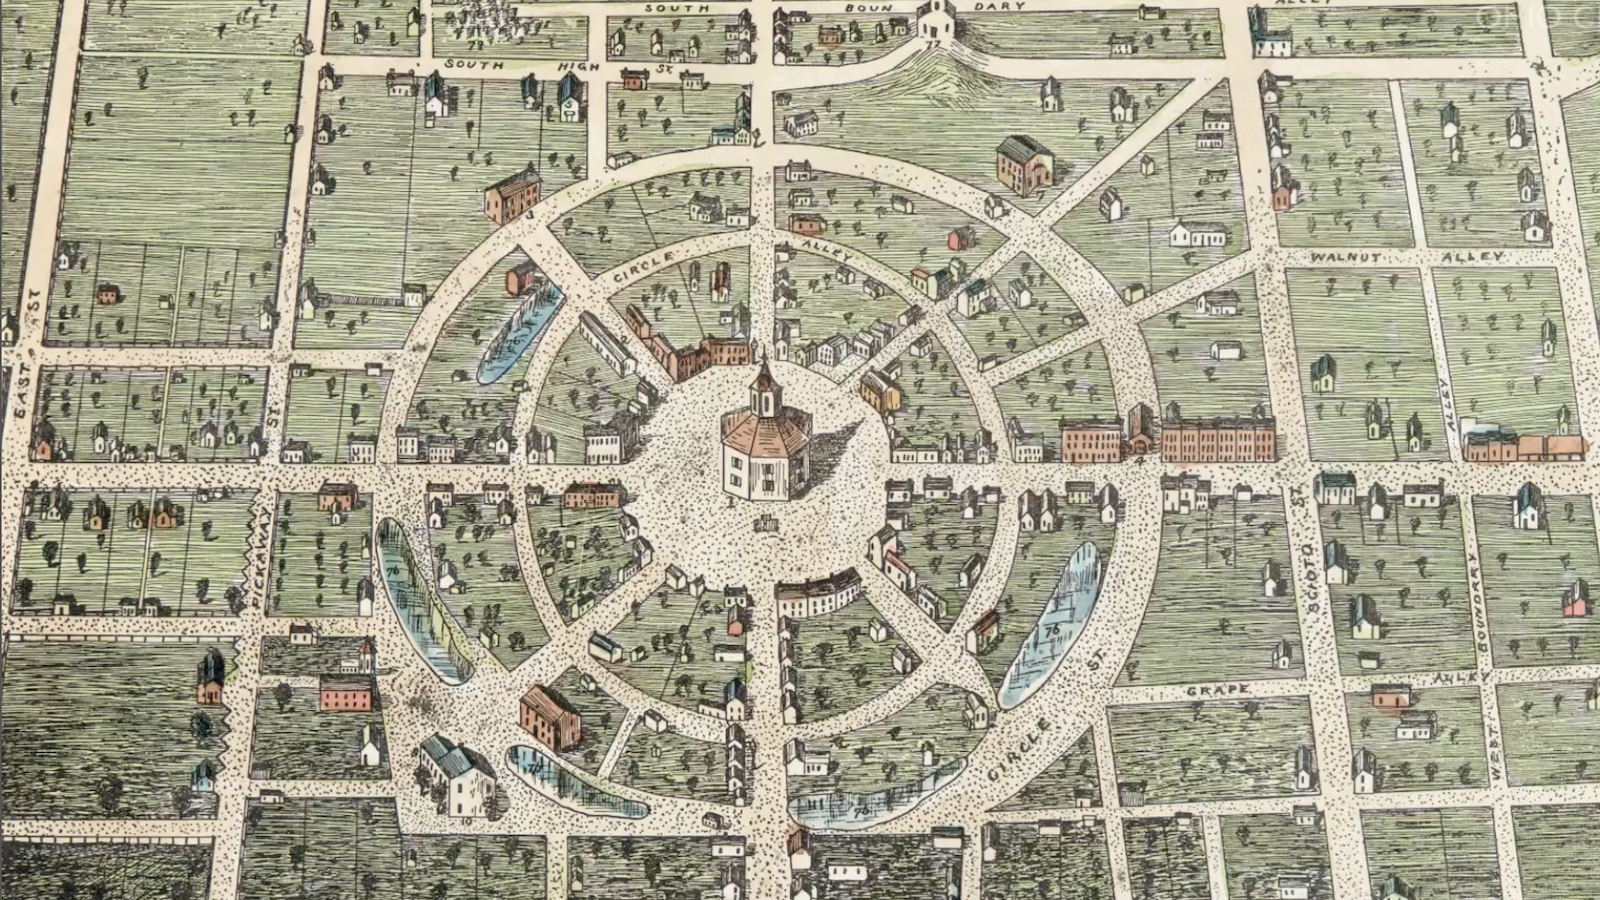 Historical map illustration depicting a planned city layout with a circular central area and radiating streets.